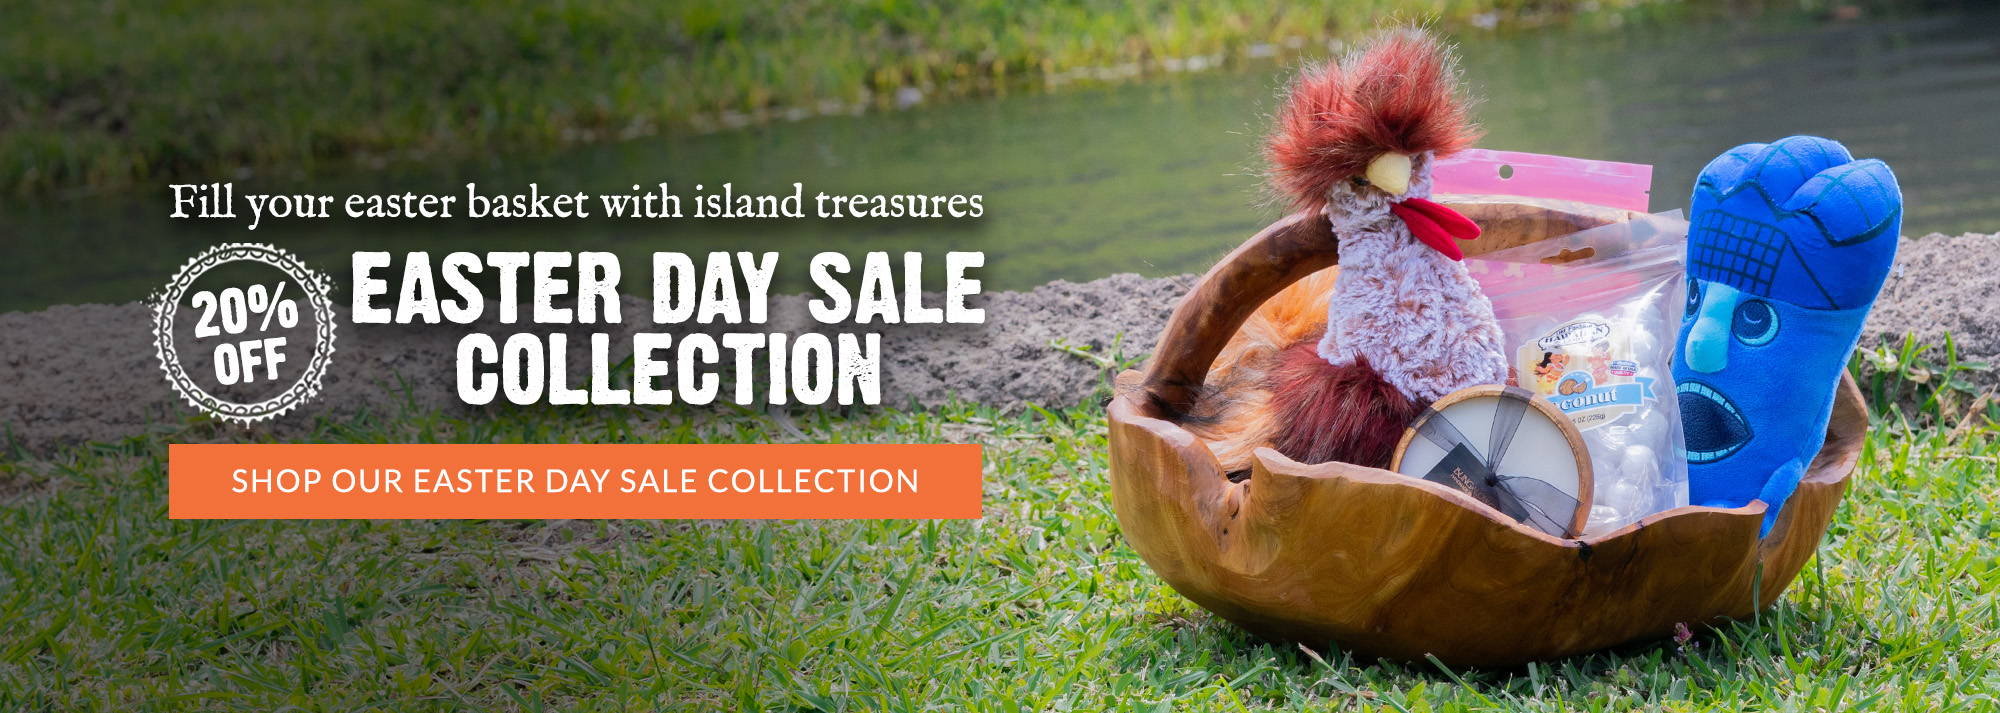 Fill your Easter basket with Island treasurers 20% off our WELCOME SPRING SALE on selected items at The Hawaii Store.